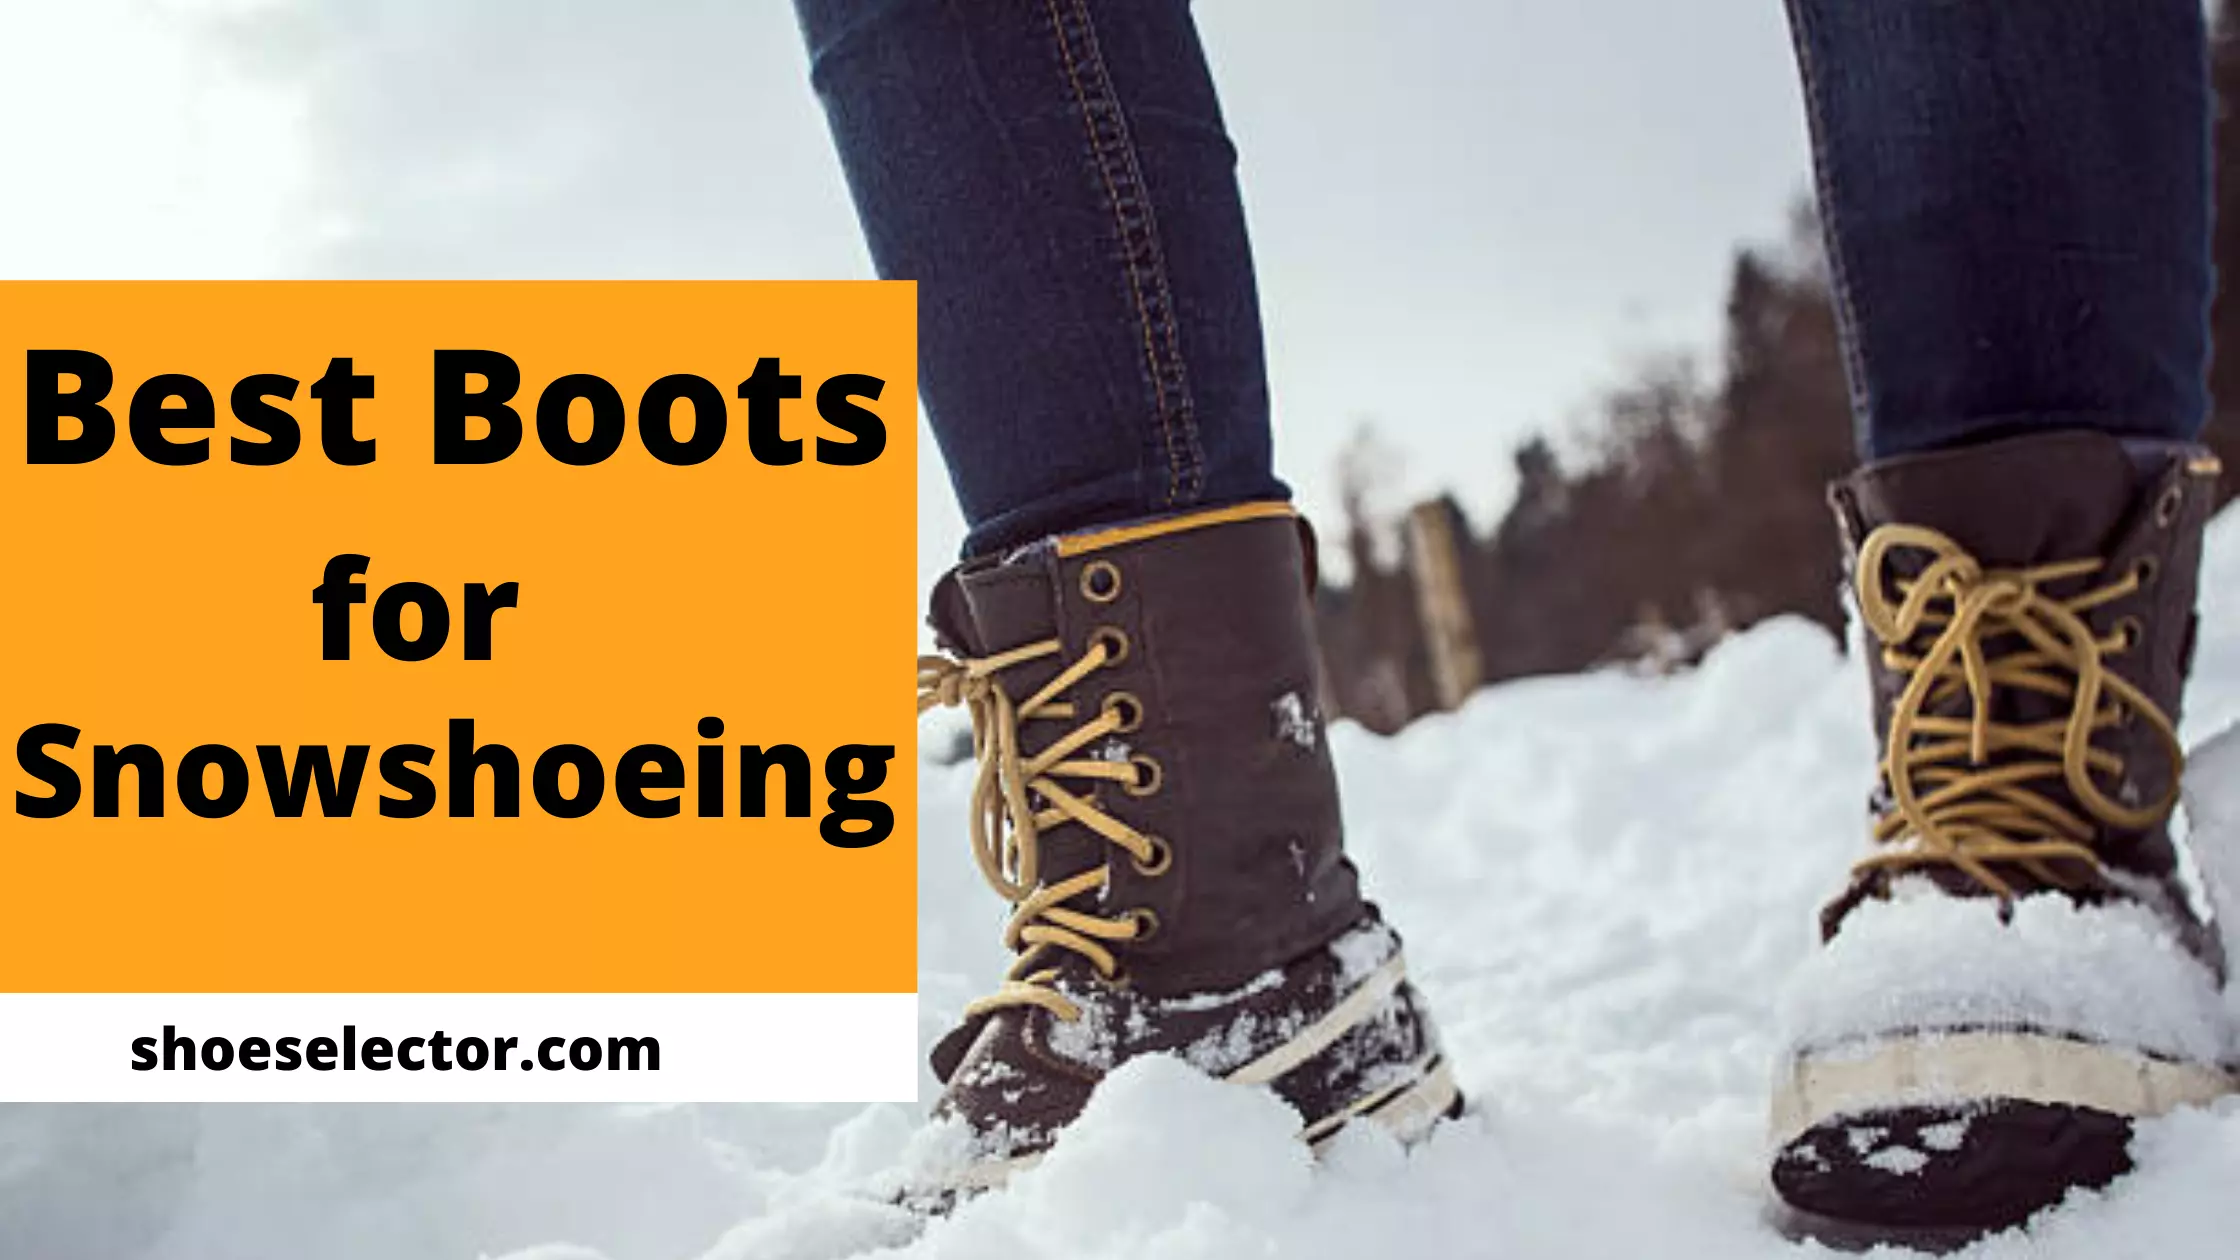 Best Boots for Snowshoeing - Comprehensive Guide